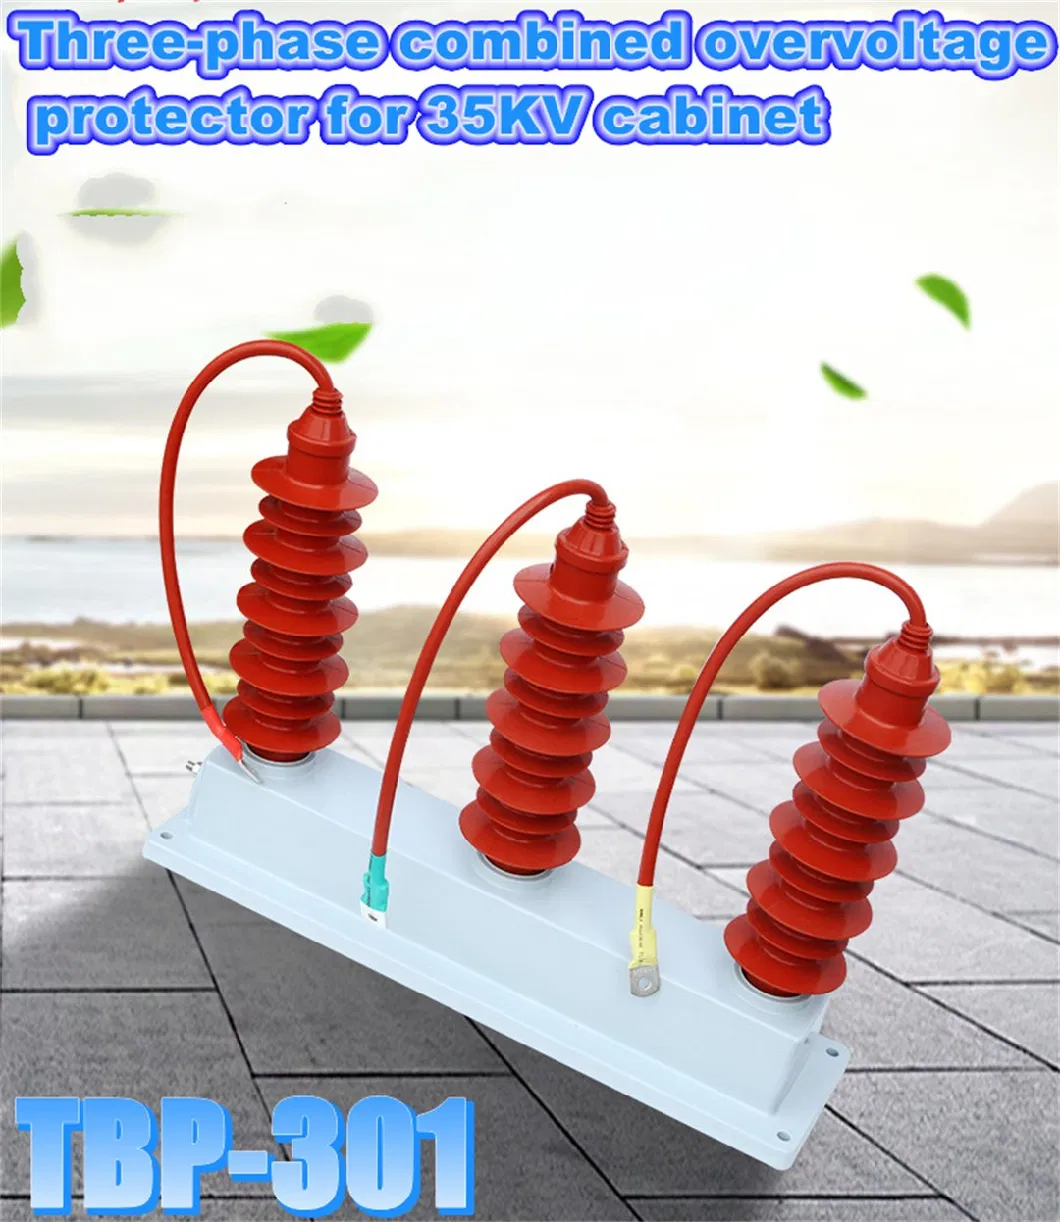 Tbp-200 35kv Three-Phase Combined Overvoltage Protector Lightning Protector